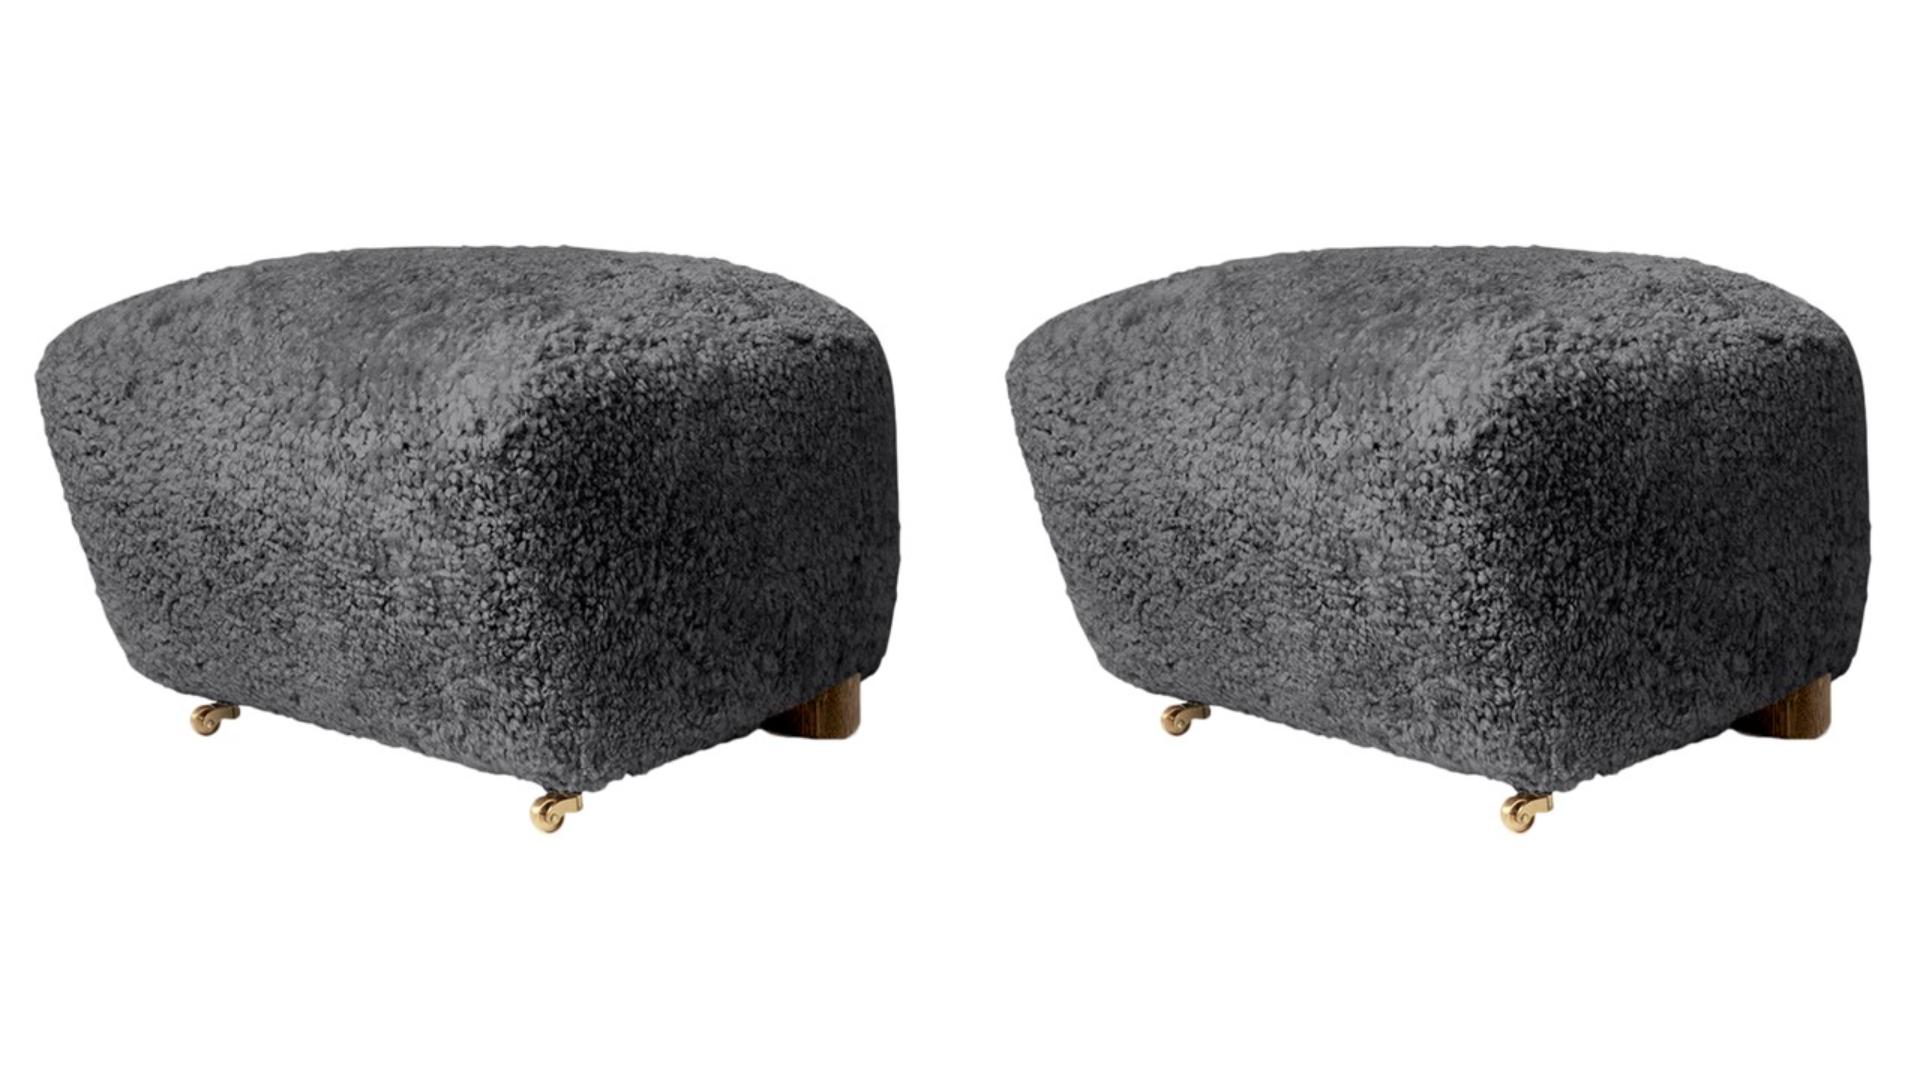 Set of 2 antrachite smoked oak sheepskin the tired man footstools by Lassen
Dimensions: W 55 x D 53 x H 36 cm 
Materials: Sheepskin.

Flemming Lassen designed the overstuffed easy chair, the tired man, for The Copenhagen Cabinetmakers’ Guild